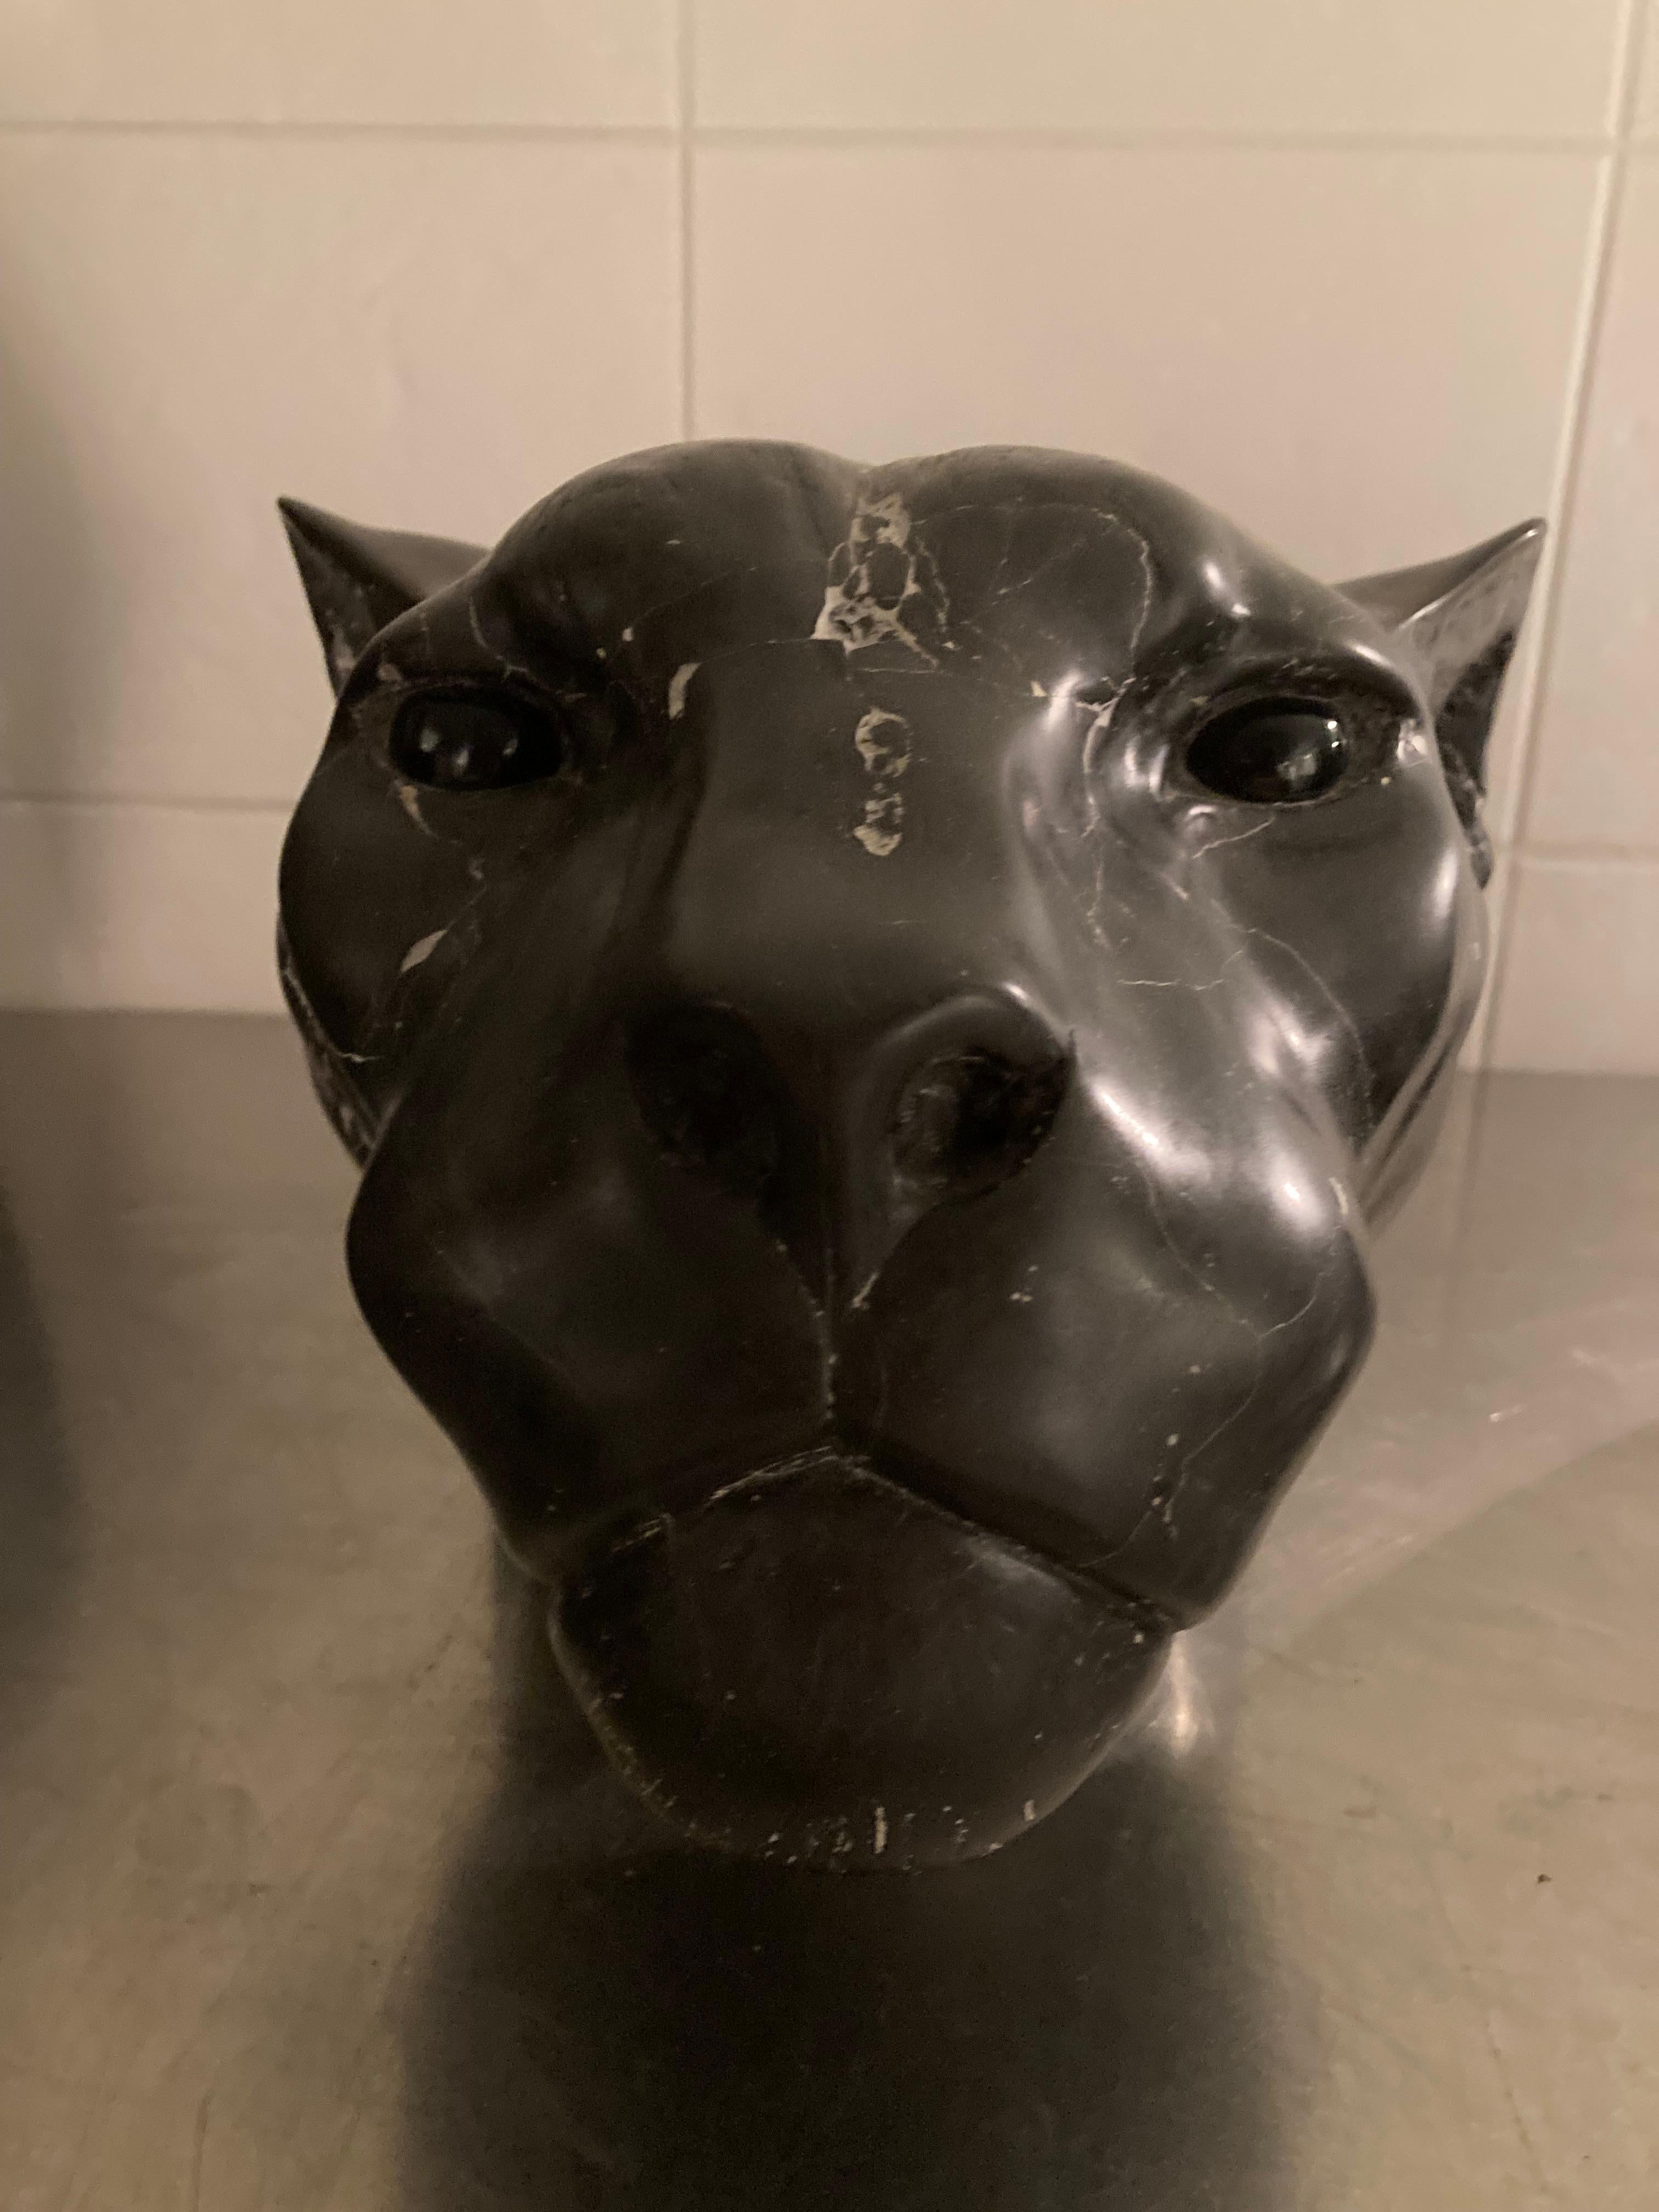 Jaguar Head Sculpture Cultivated Marble Casted Wild Animal In Stock 
Chris Tap (1973, Amsterdam) attended university where he studied economy and cultural anthropology, before he became a full time sculptor. In the last 12 years he developed his